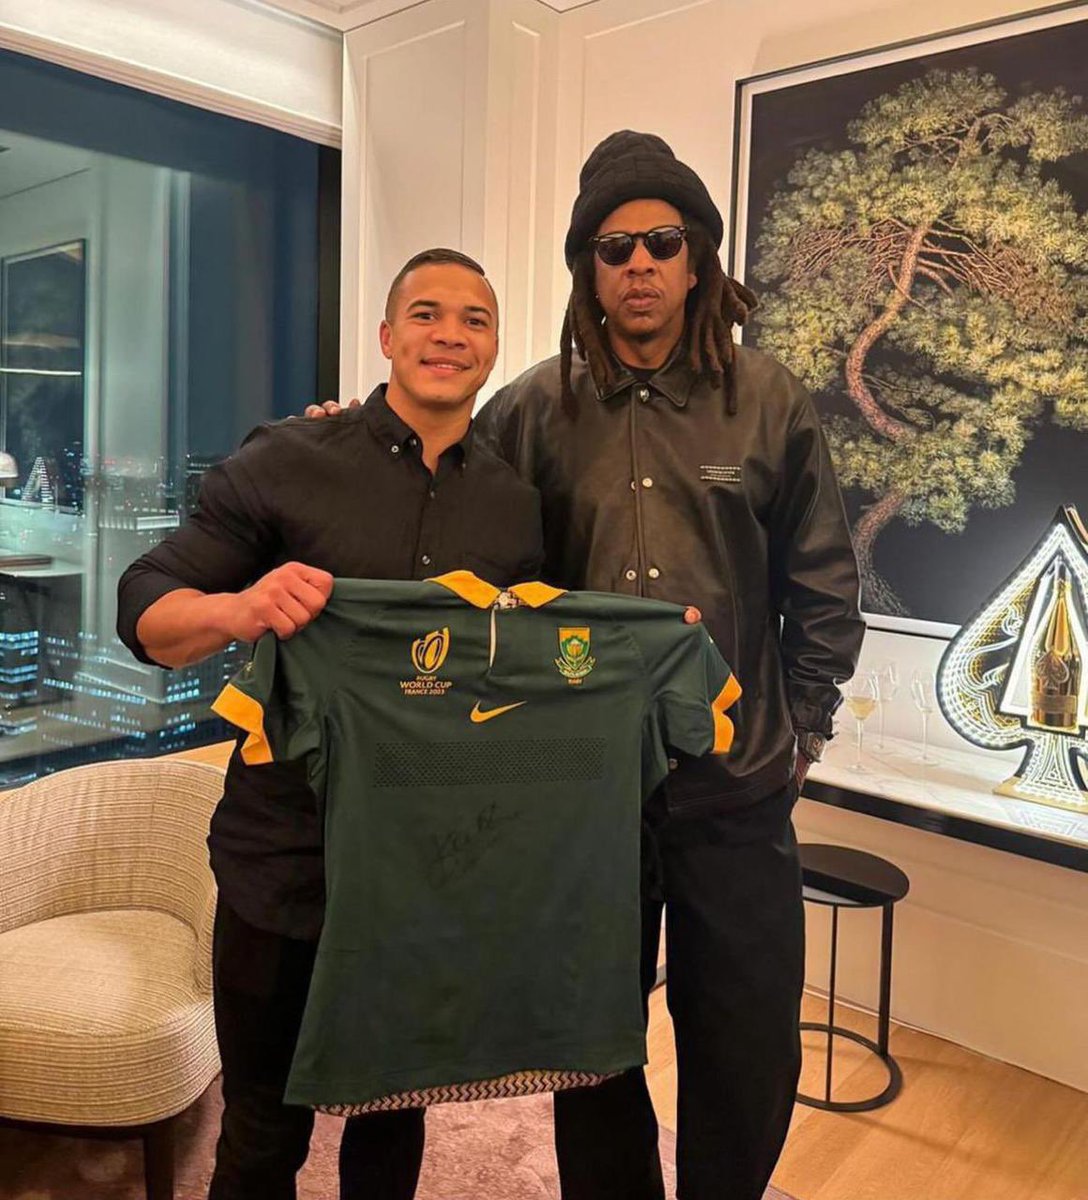 No Div 1 games in JRLO this weekend so some players free to enjoy Tokyo nightlife with Cheslin Kolbe meeting Jay-Z. Rumours that ex Suntory Director of Rugby & current Japan coach said he would have been more impressed if the RWC winner had met Jimmy Barnes are unfounded!